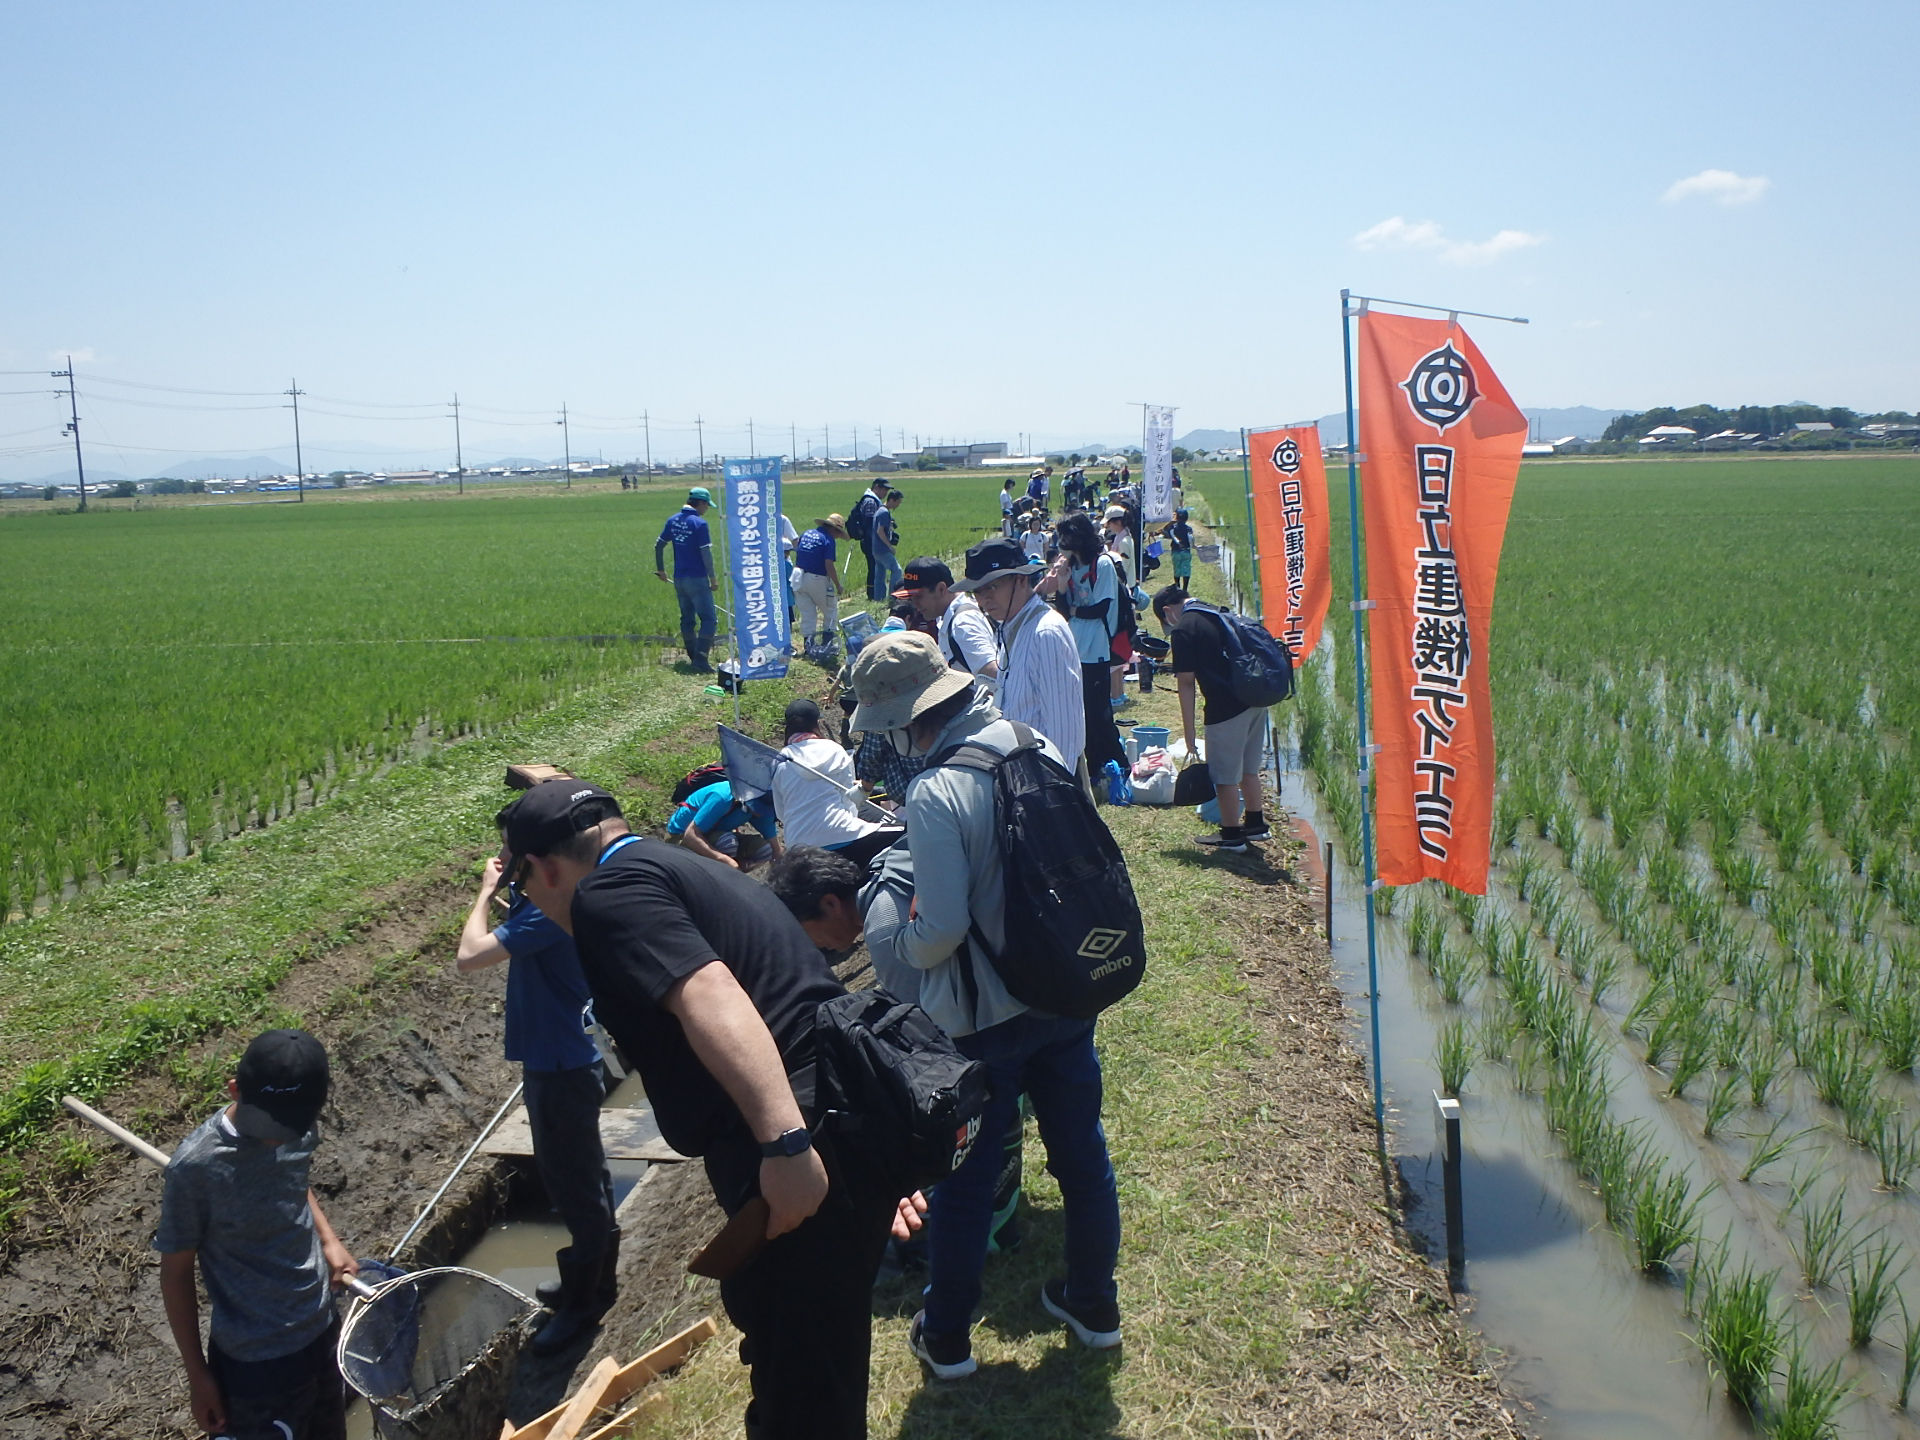 Rice planting and wildlife observation by Hitachi Construction Machinery Tierra, they take part in “Fish cradle Rice paddy” Project that aim to restore a paddy. 